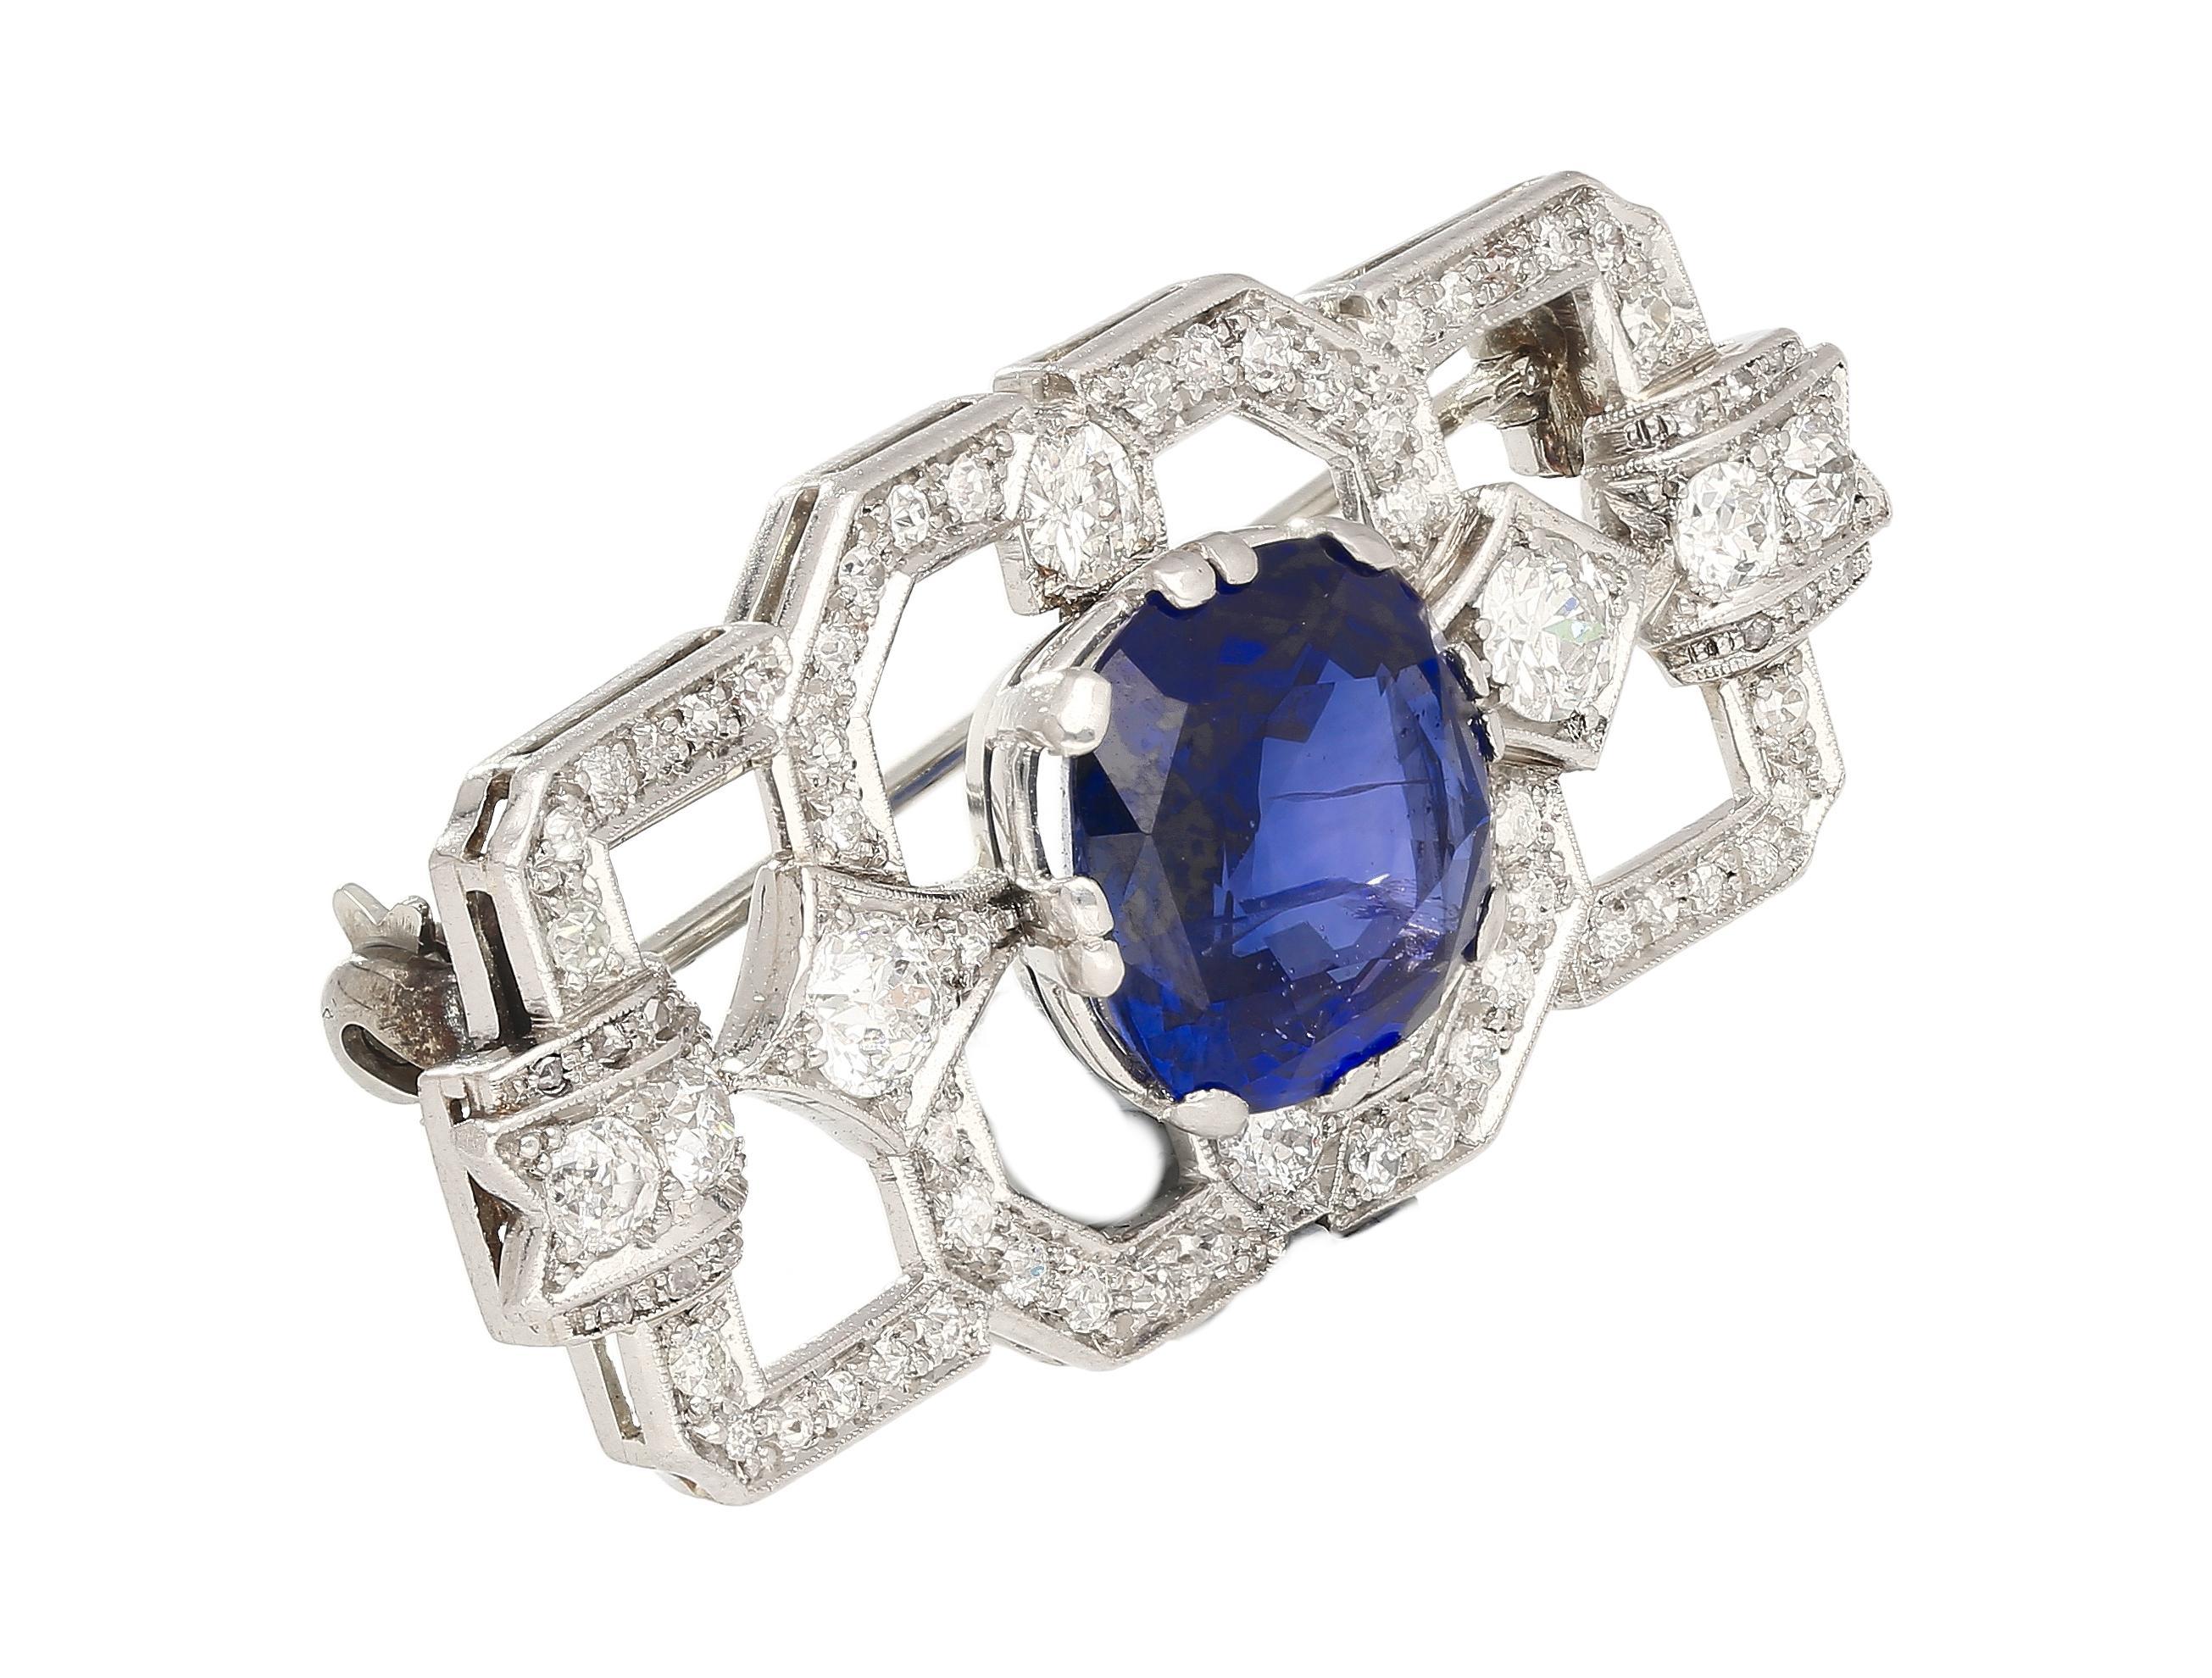 8.64 Carat AGL Certified Ceylon Cushion Cut Blue Sapphire and Diamond Brooch Pin In Excellent Condition For Sale In Miami, FL